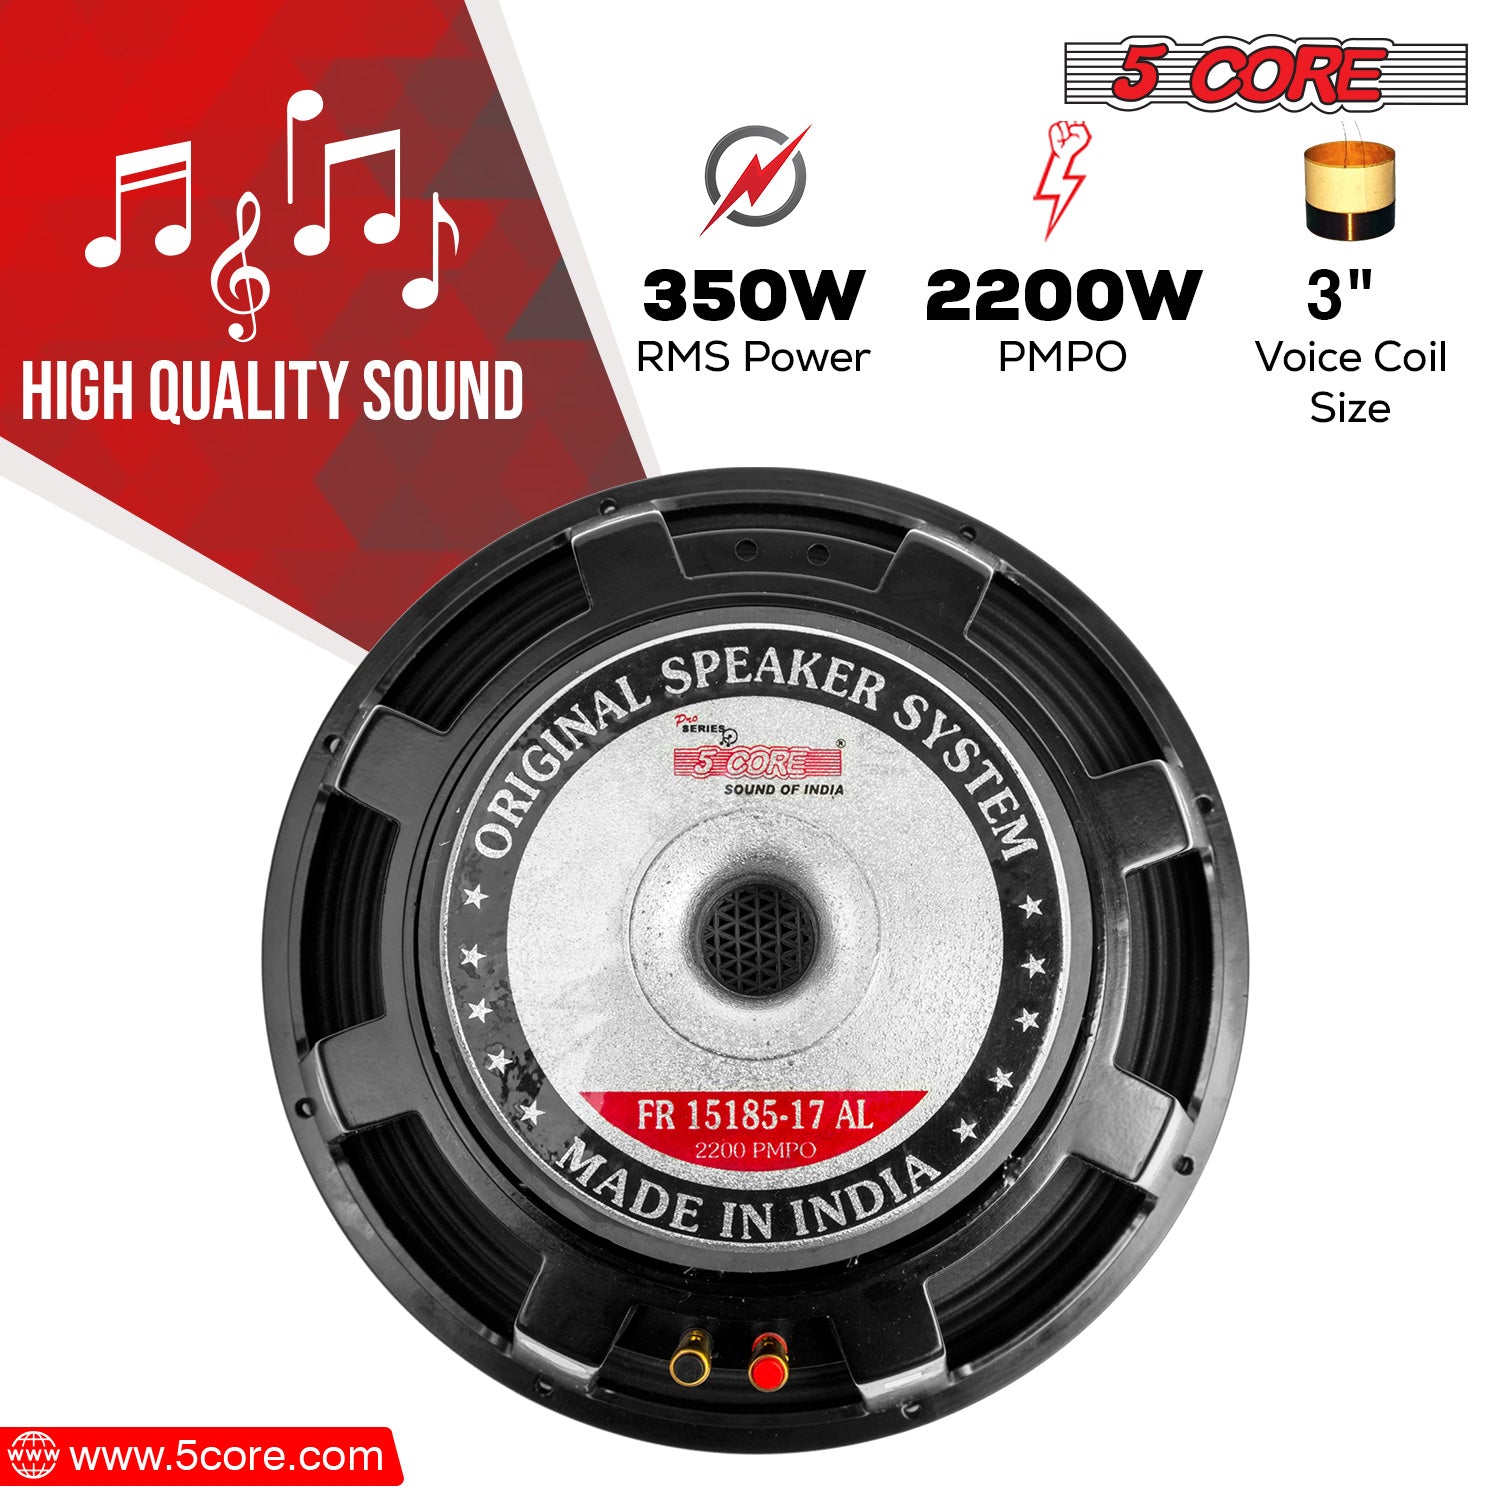 2200W Peak Output for High-Intensity Sound